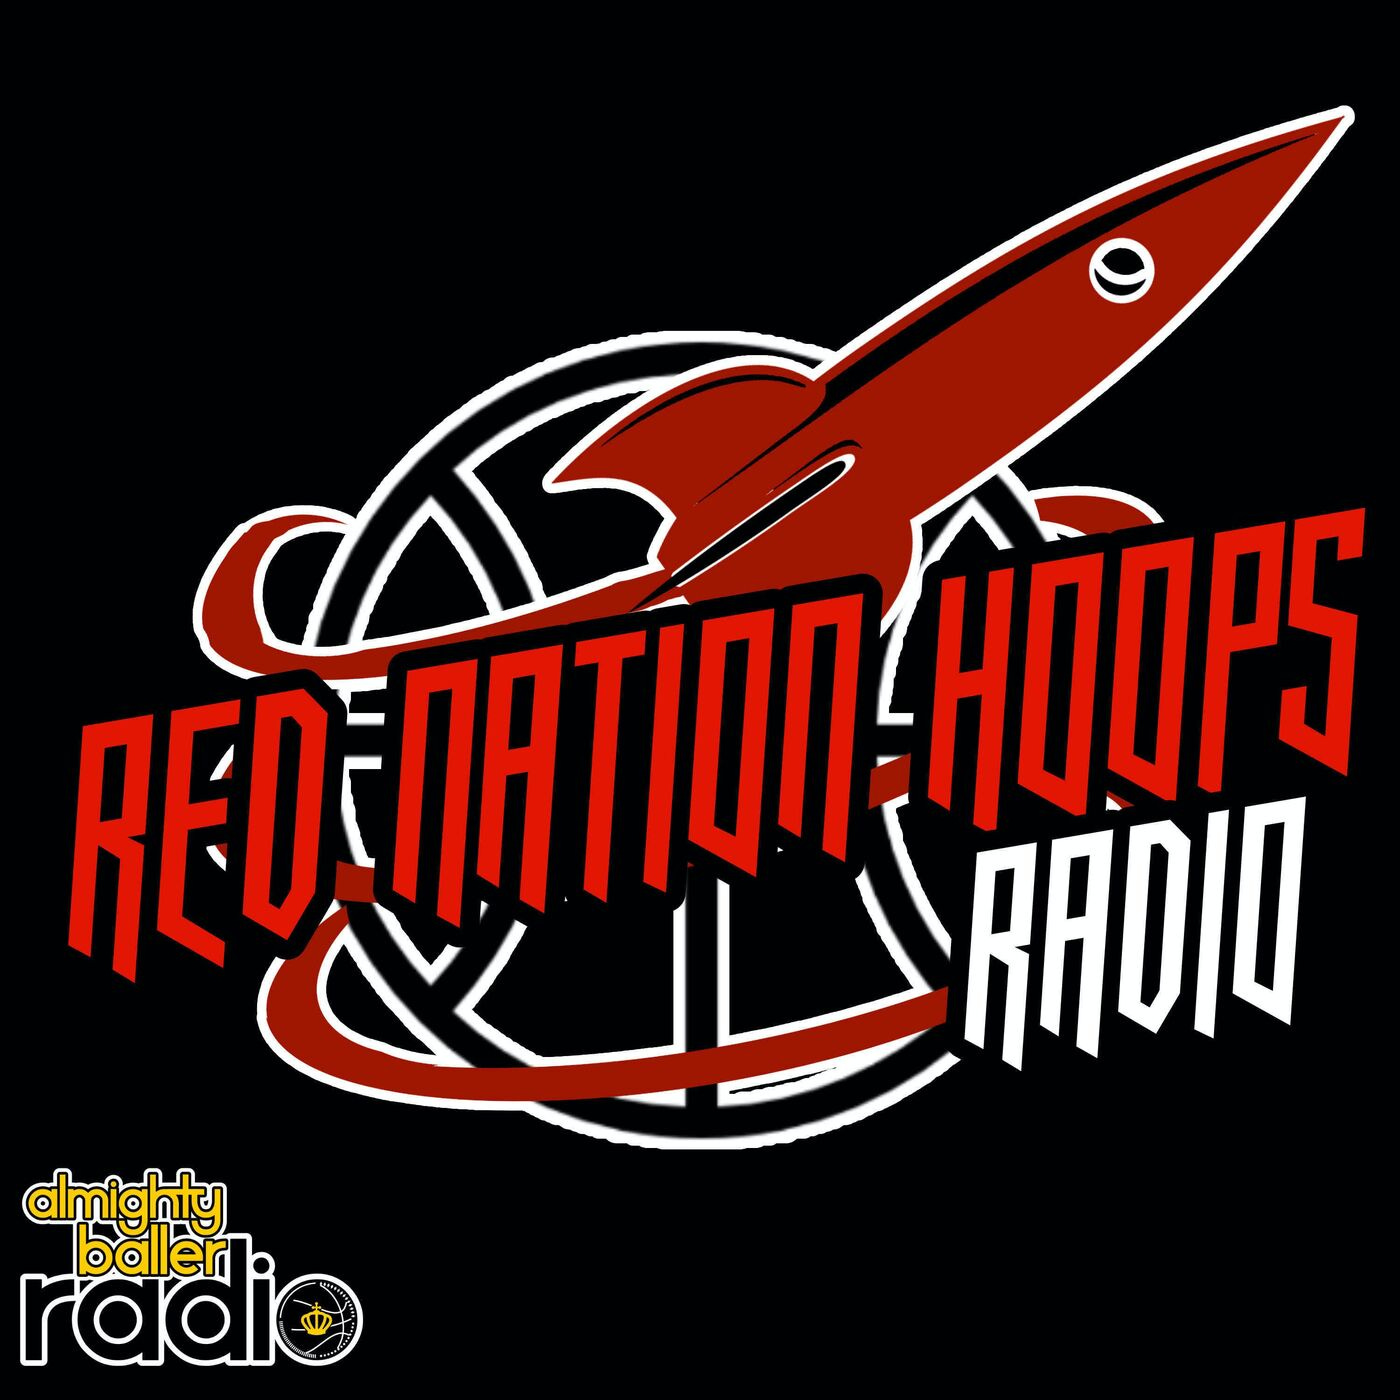 Red Nation Hoops Ep. 49: Recapping Games 3 and 4 + Nene Injury